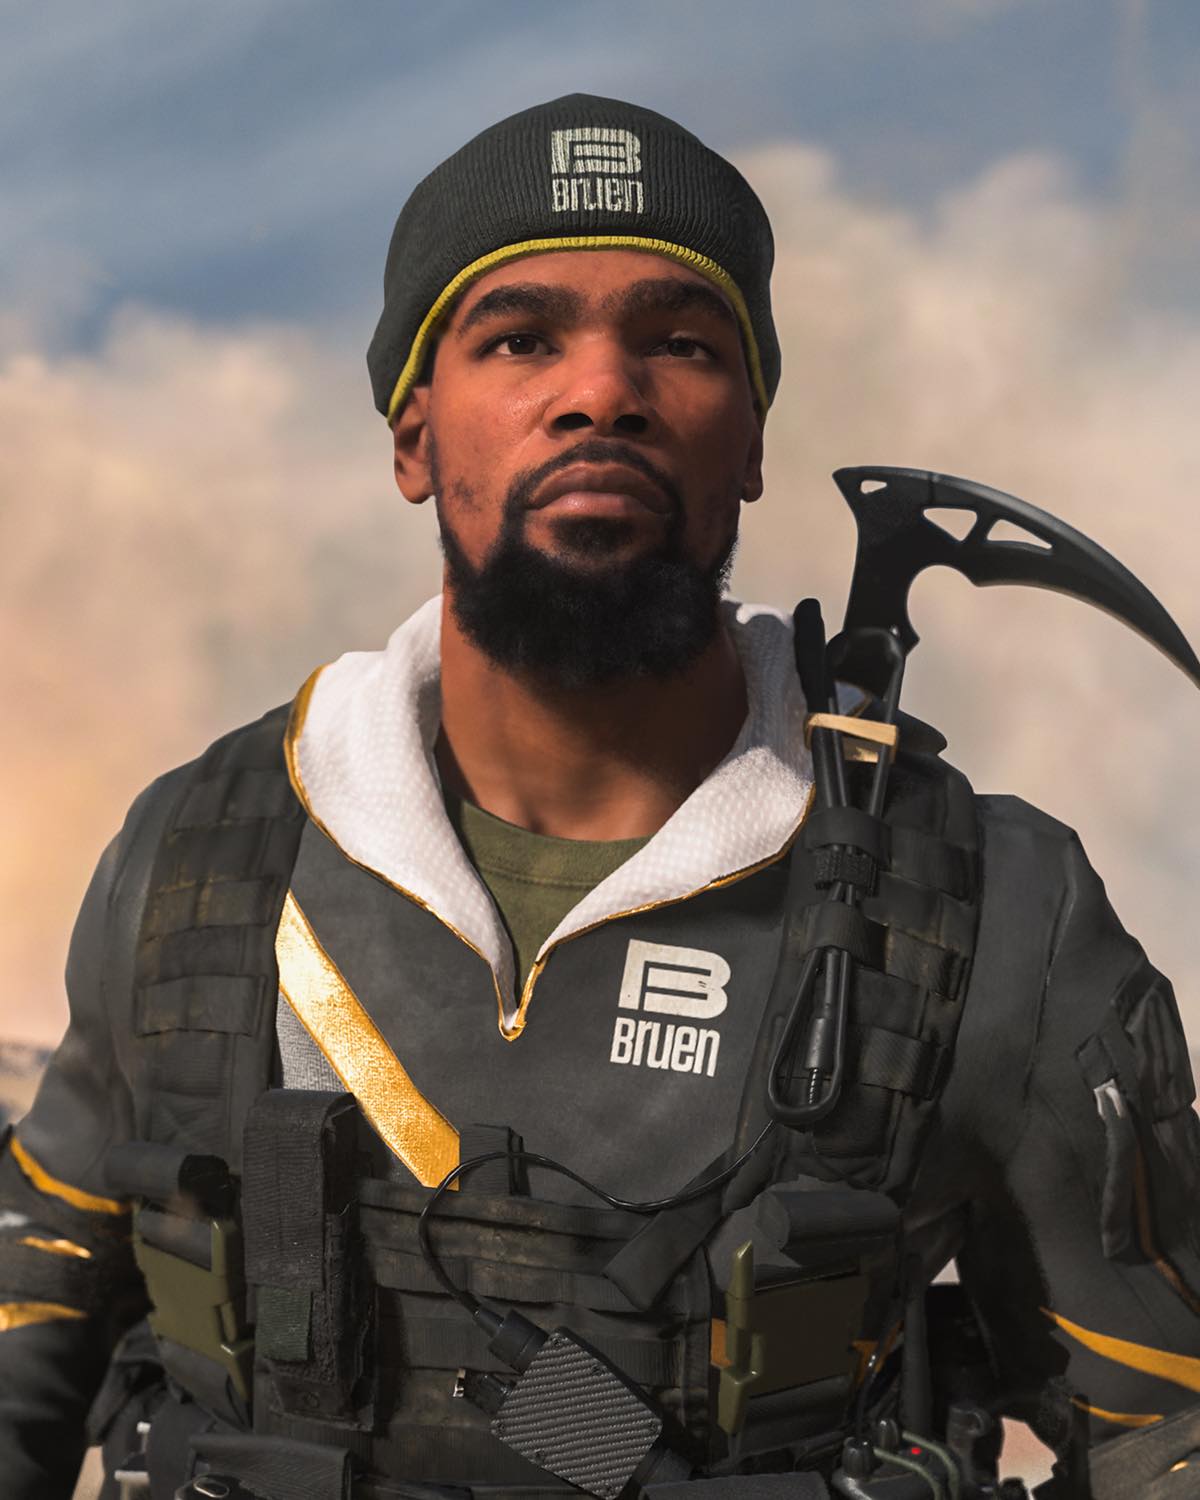 Kevin Durant as he appears in Call of Duty in 2023; he’s wearing a beanie and tactical gear, with a climbing axe poking out of his backpack